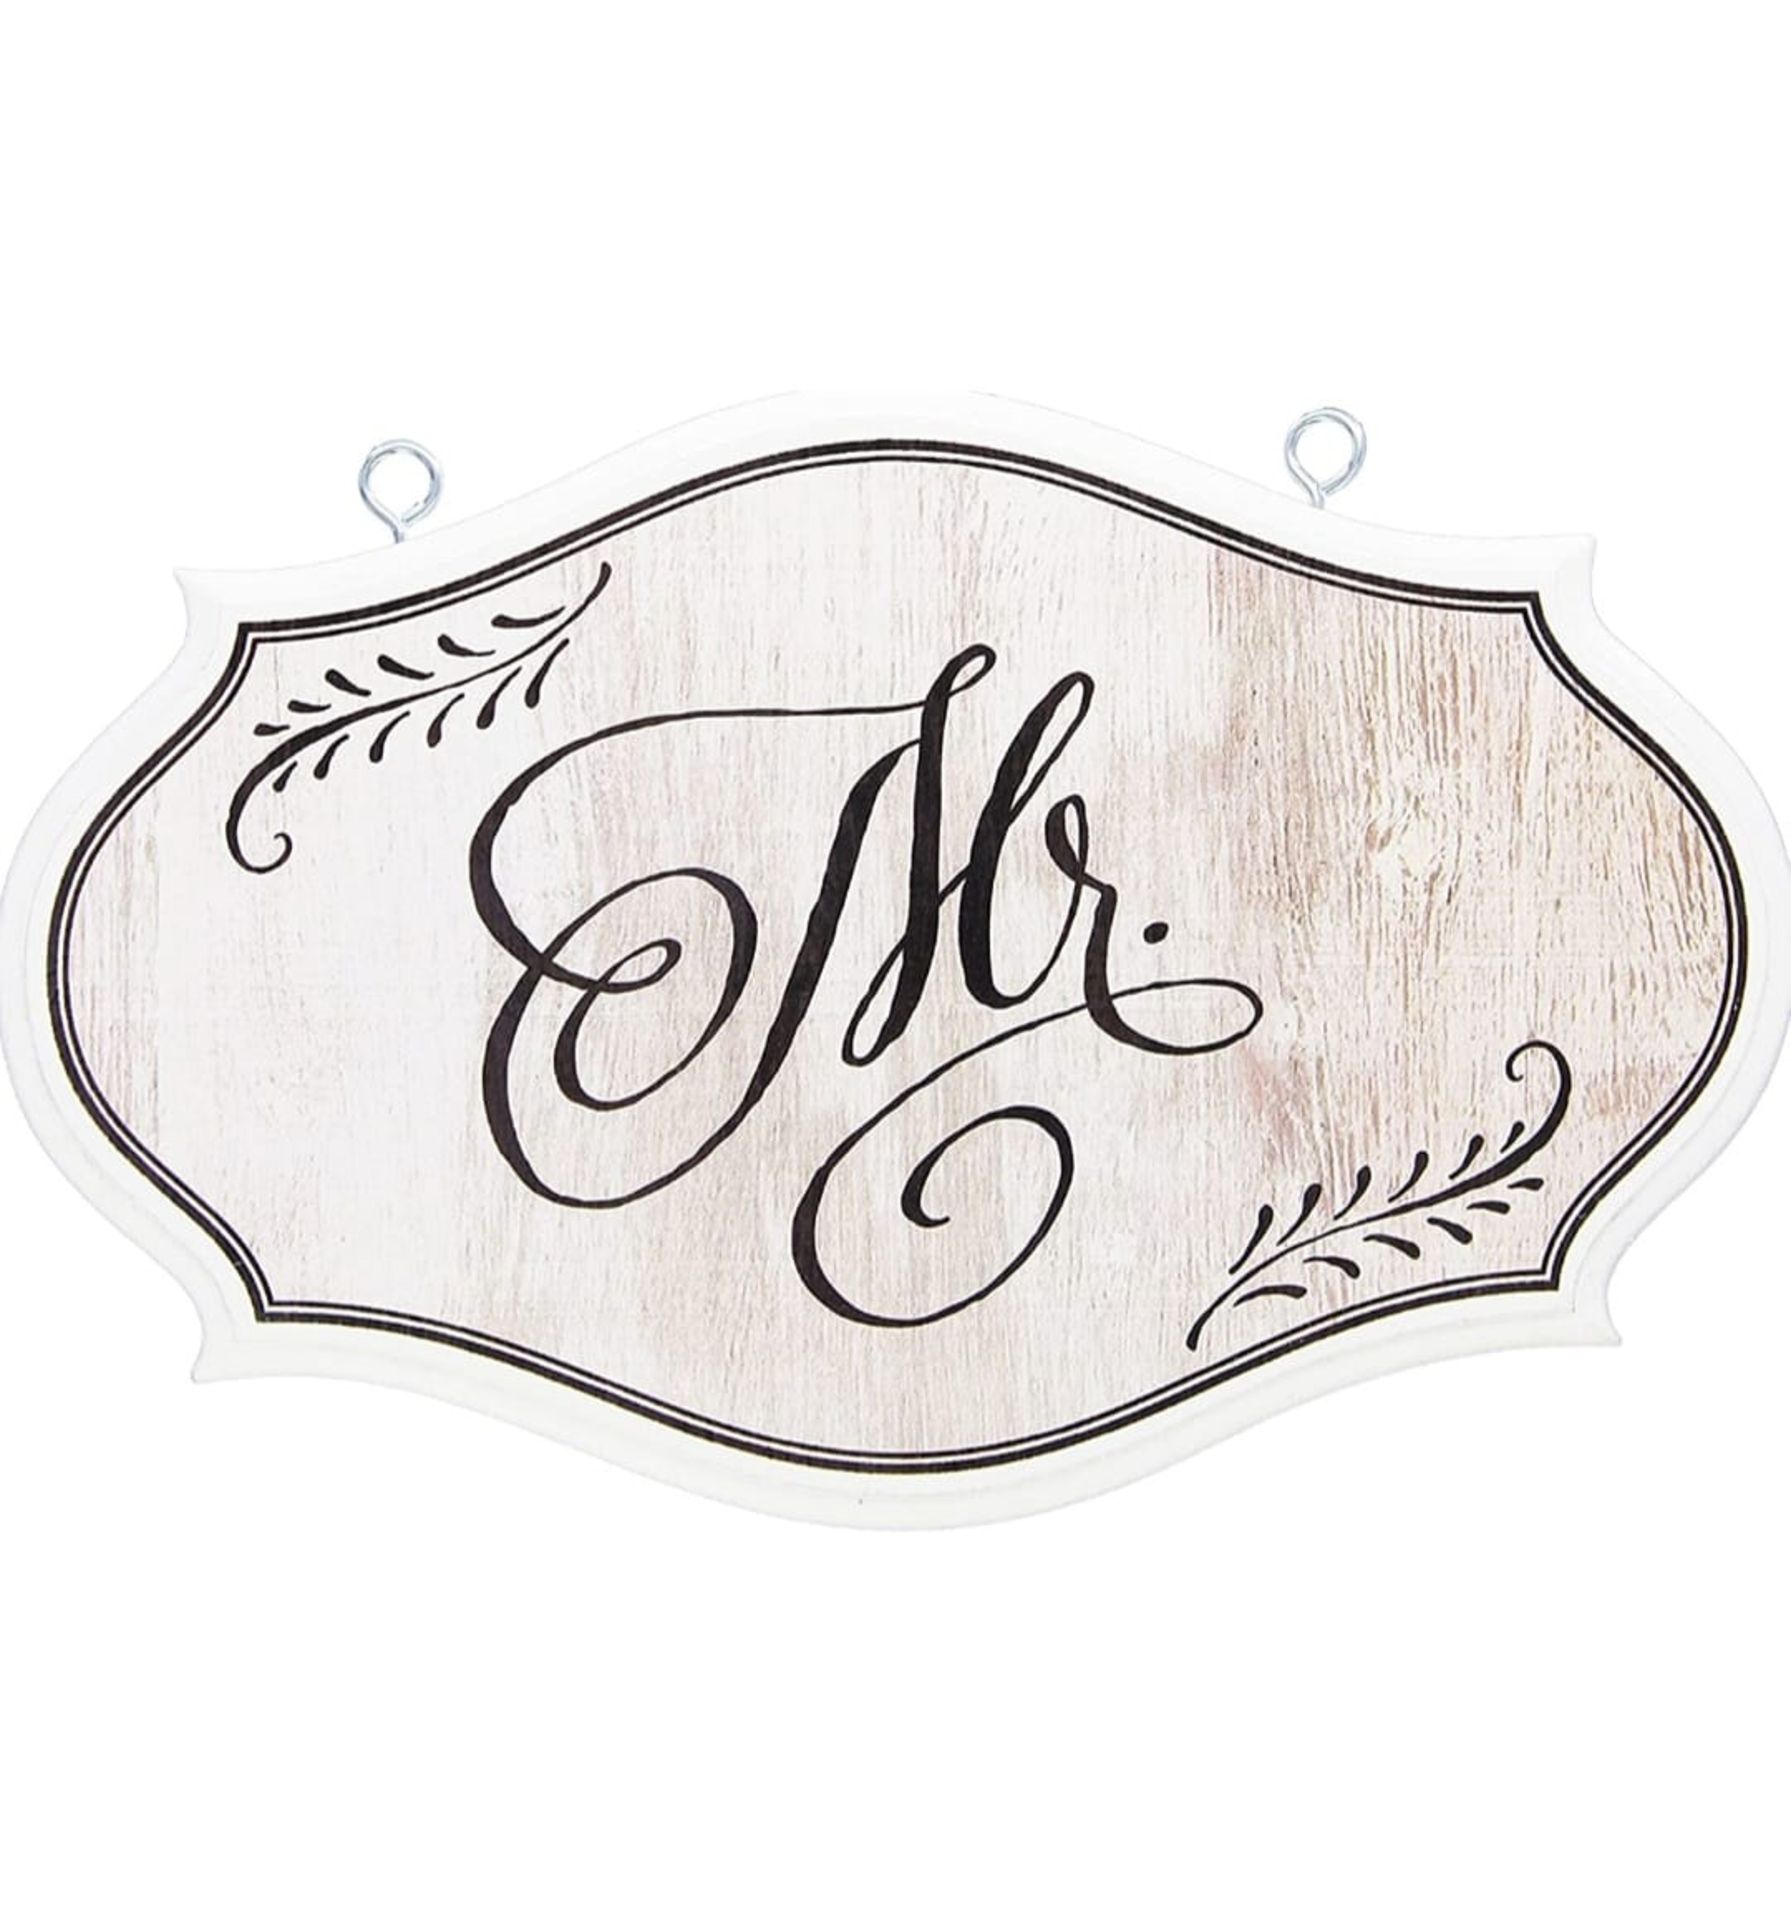 X 12 Mr & Mrs OVAL WOODEN SIGNS - CONSISTING OF X 2 Mr IN WHITE& X 10 Mr INN BLACK BY LILLIAN ROSE -